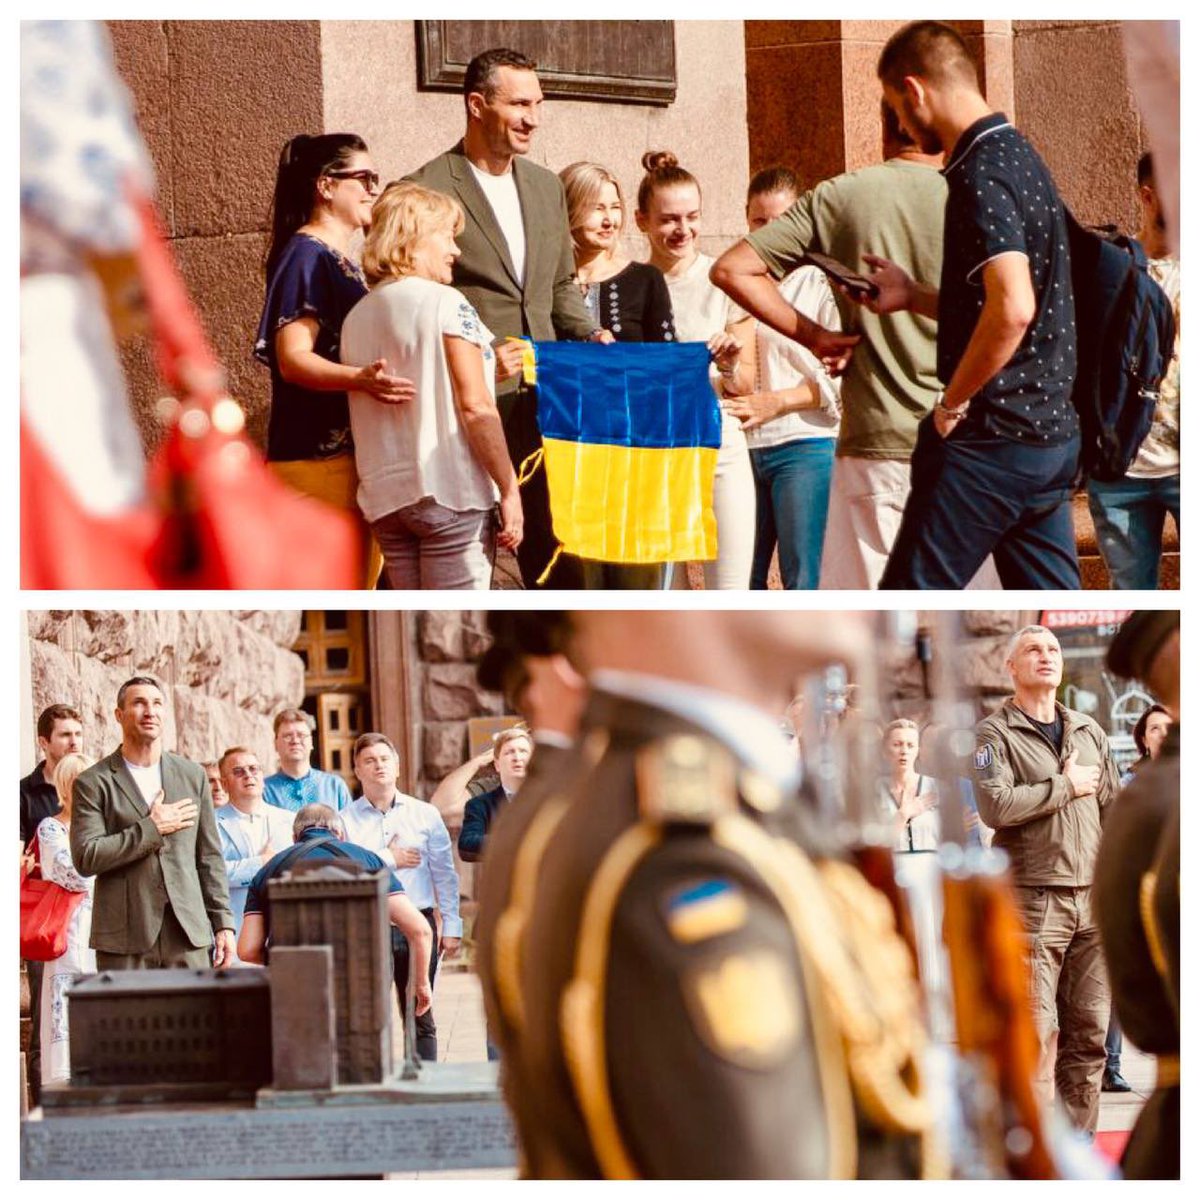 Today is 🇺🇦 Flag Day. 

The Ukrainian flag doesn't stand for yellow and blue only, but as well for freedom and life, democracy and diversity. For resistance and will. 

For a free world and a peaceful future. #SlavaUkraini 🇺🇦 #Ukraine #WeAreAllUkrainians